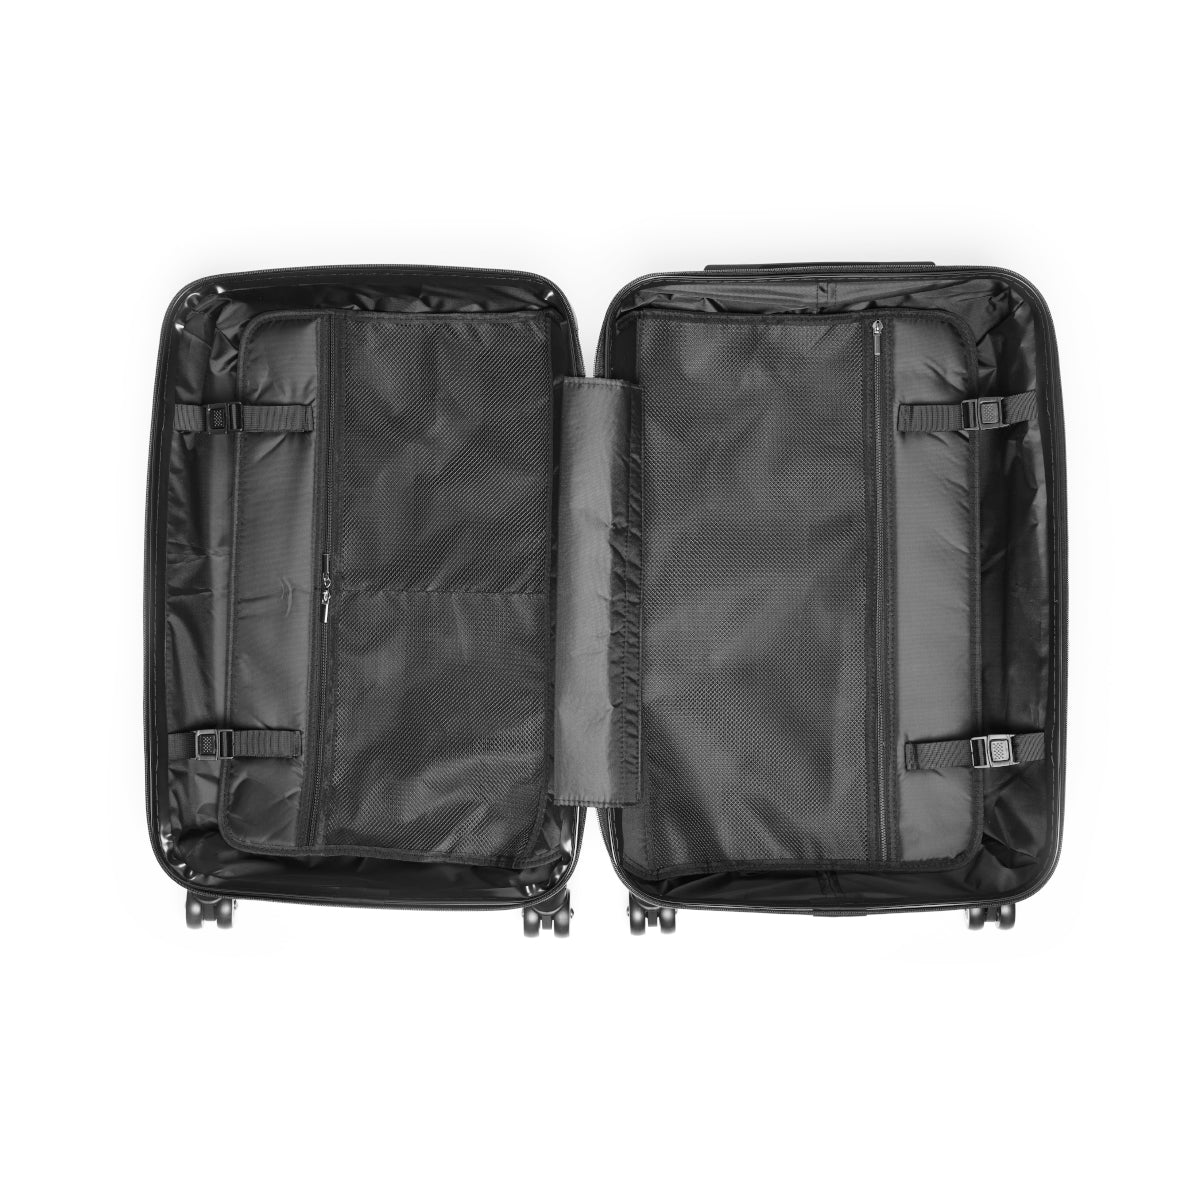 Getrott No Doubt Tragic Kingdom 1995 Black Cabin Suitcase Inner Pockets Extended Storage Adjustable Telescopic Handle Inner Pockets Double wheeled Polycarbonate Hard-shell Built-in Lock